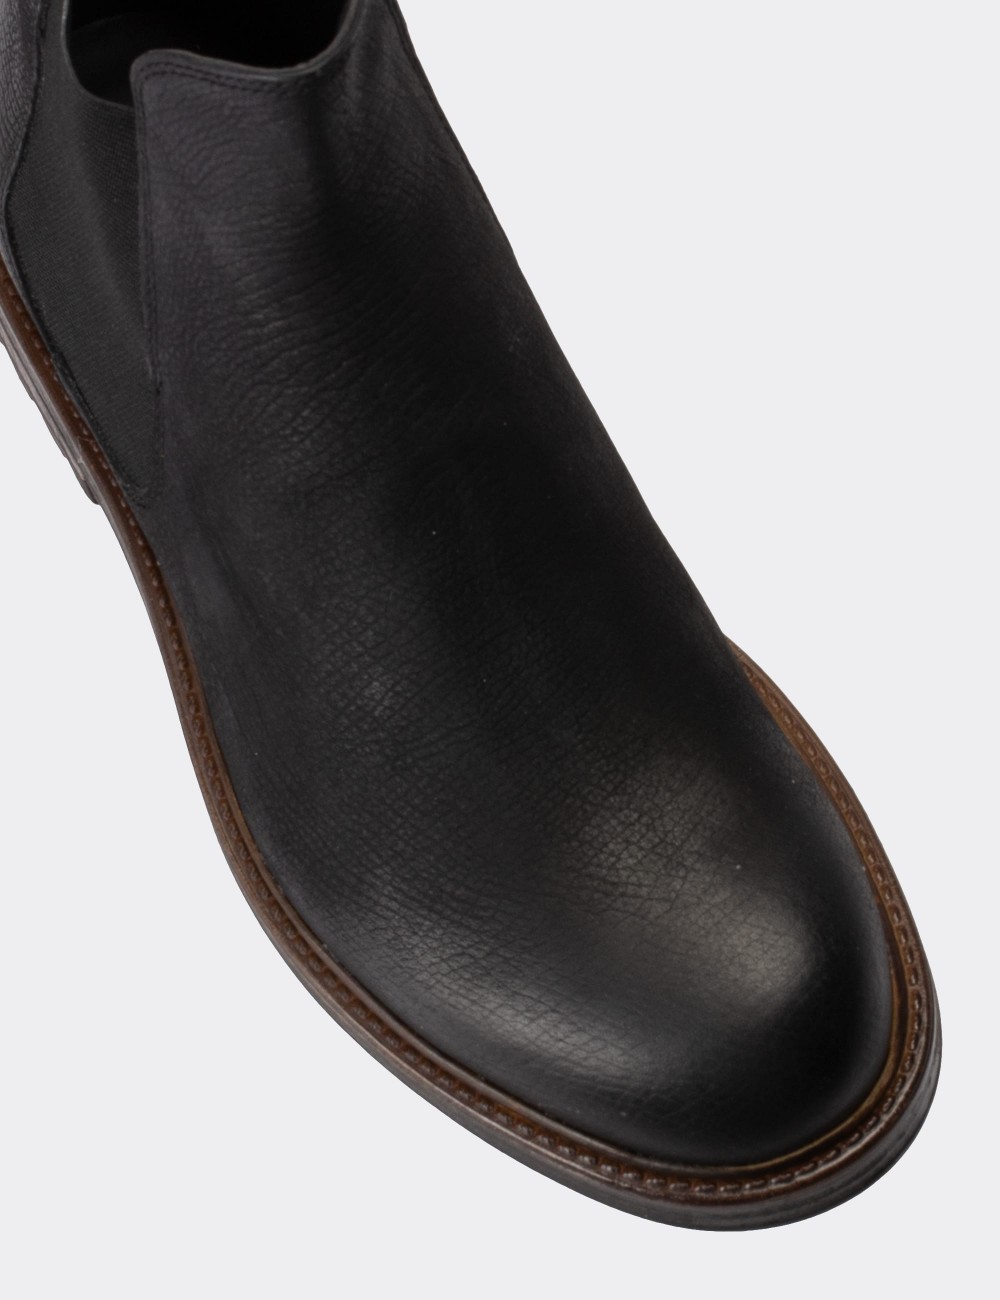 Black  Leather Chelsea Boots - 01620MSYHC14